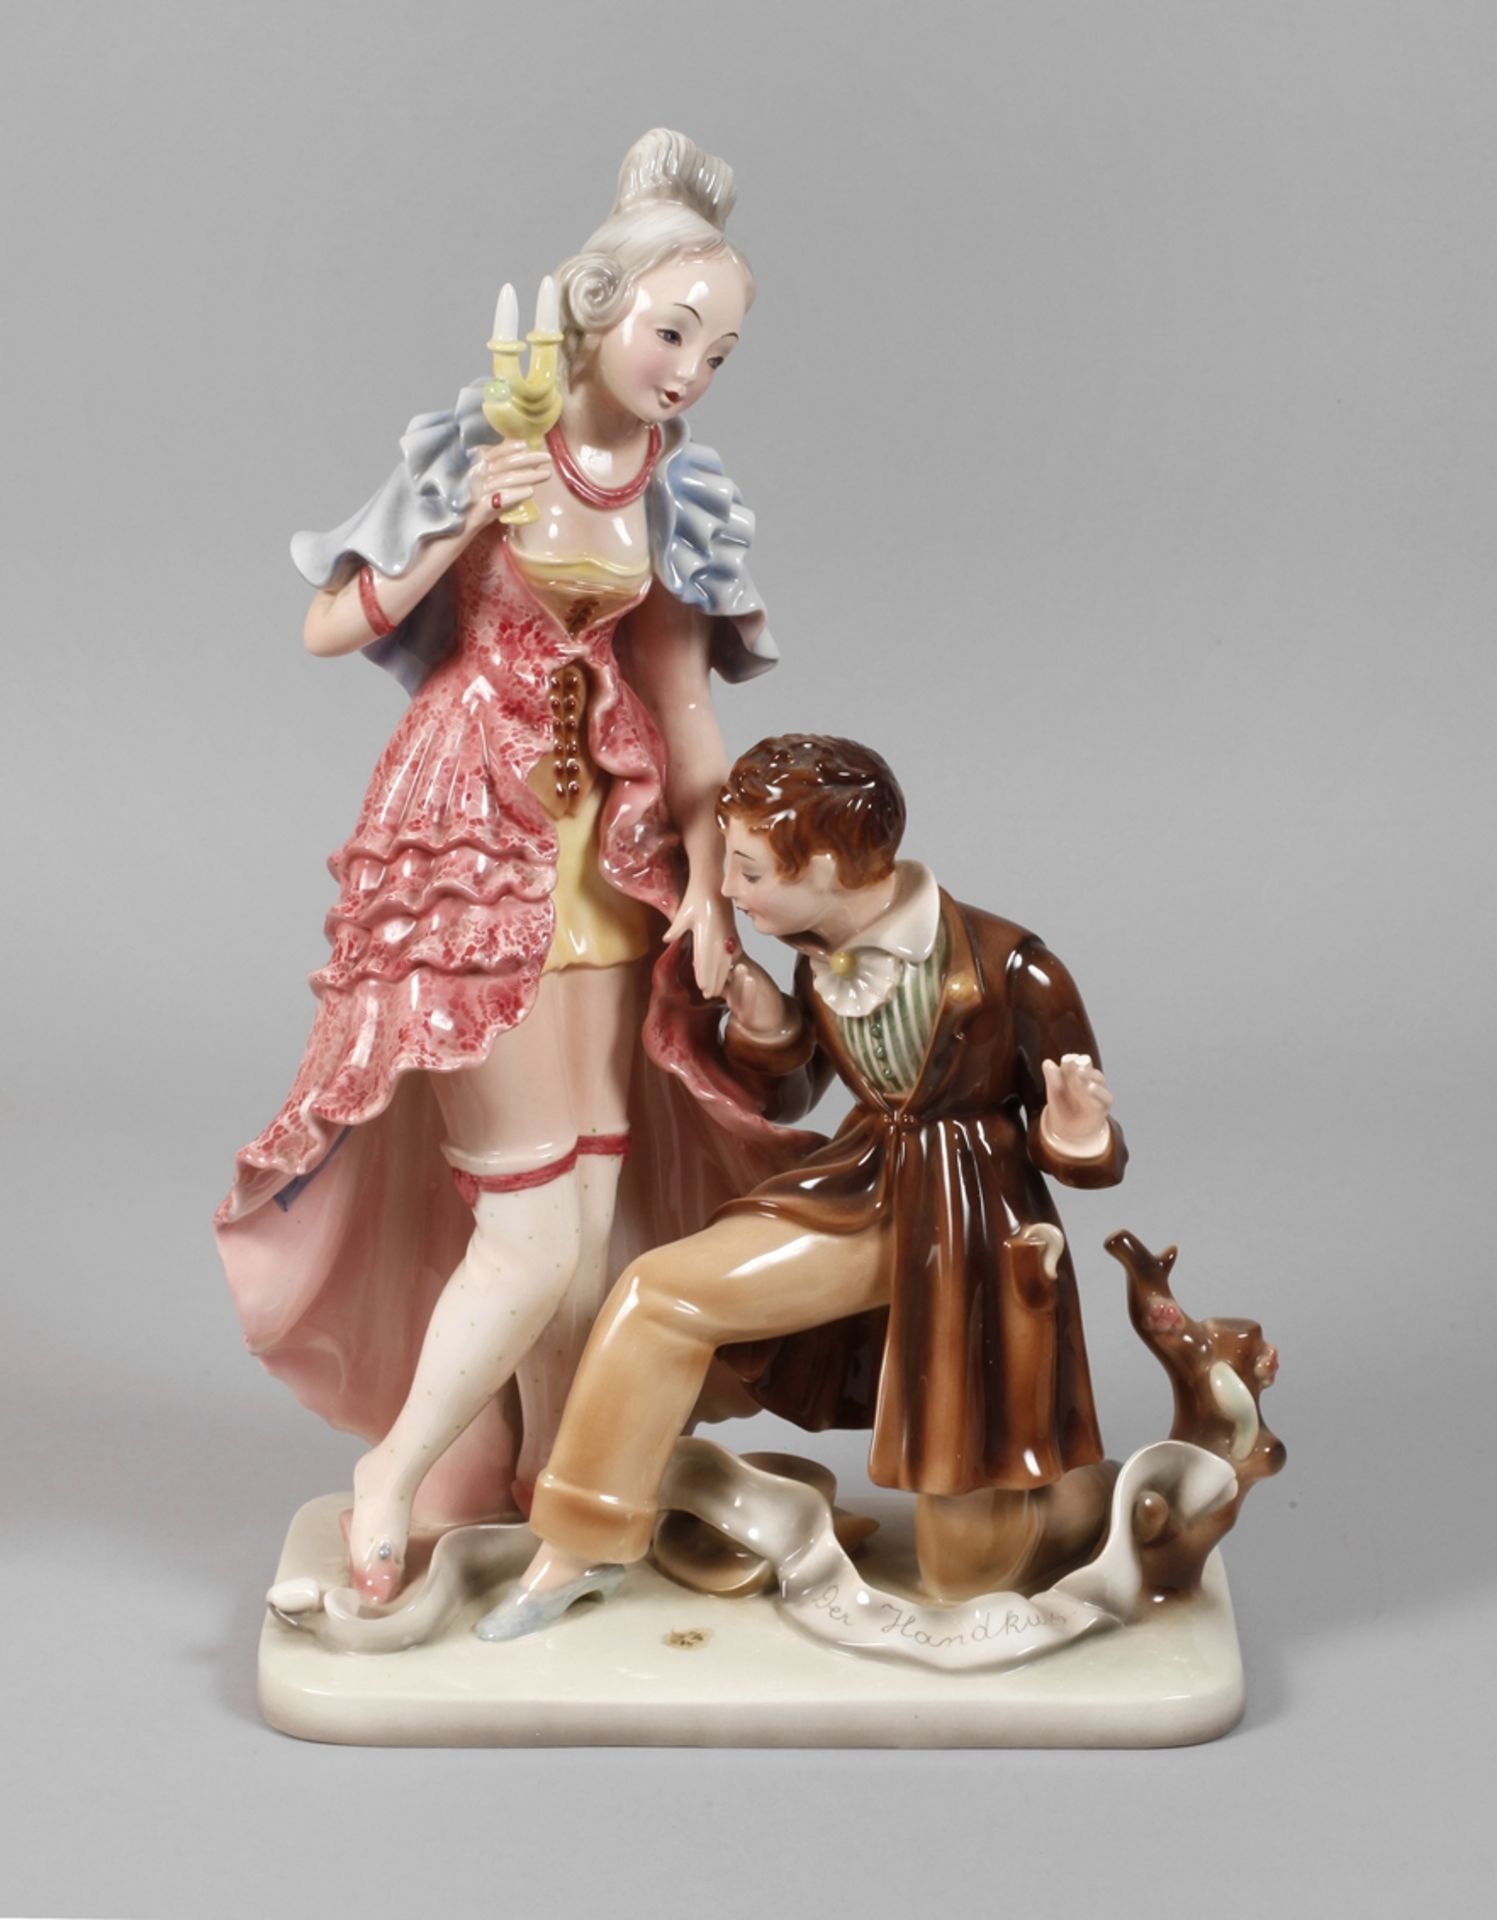 Goldscheid figurine "The kiss on the hand"